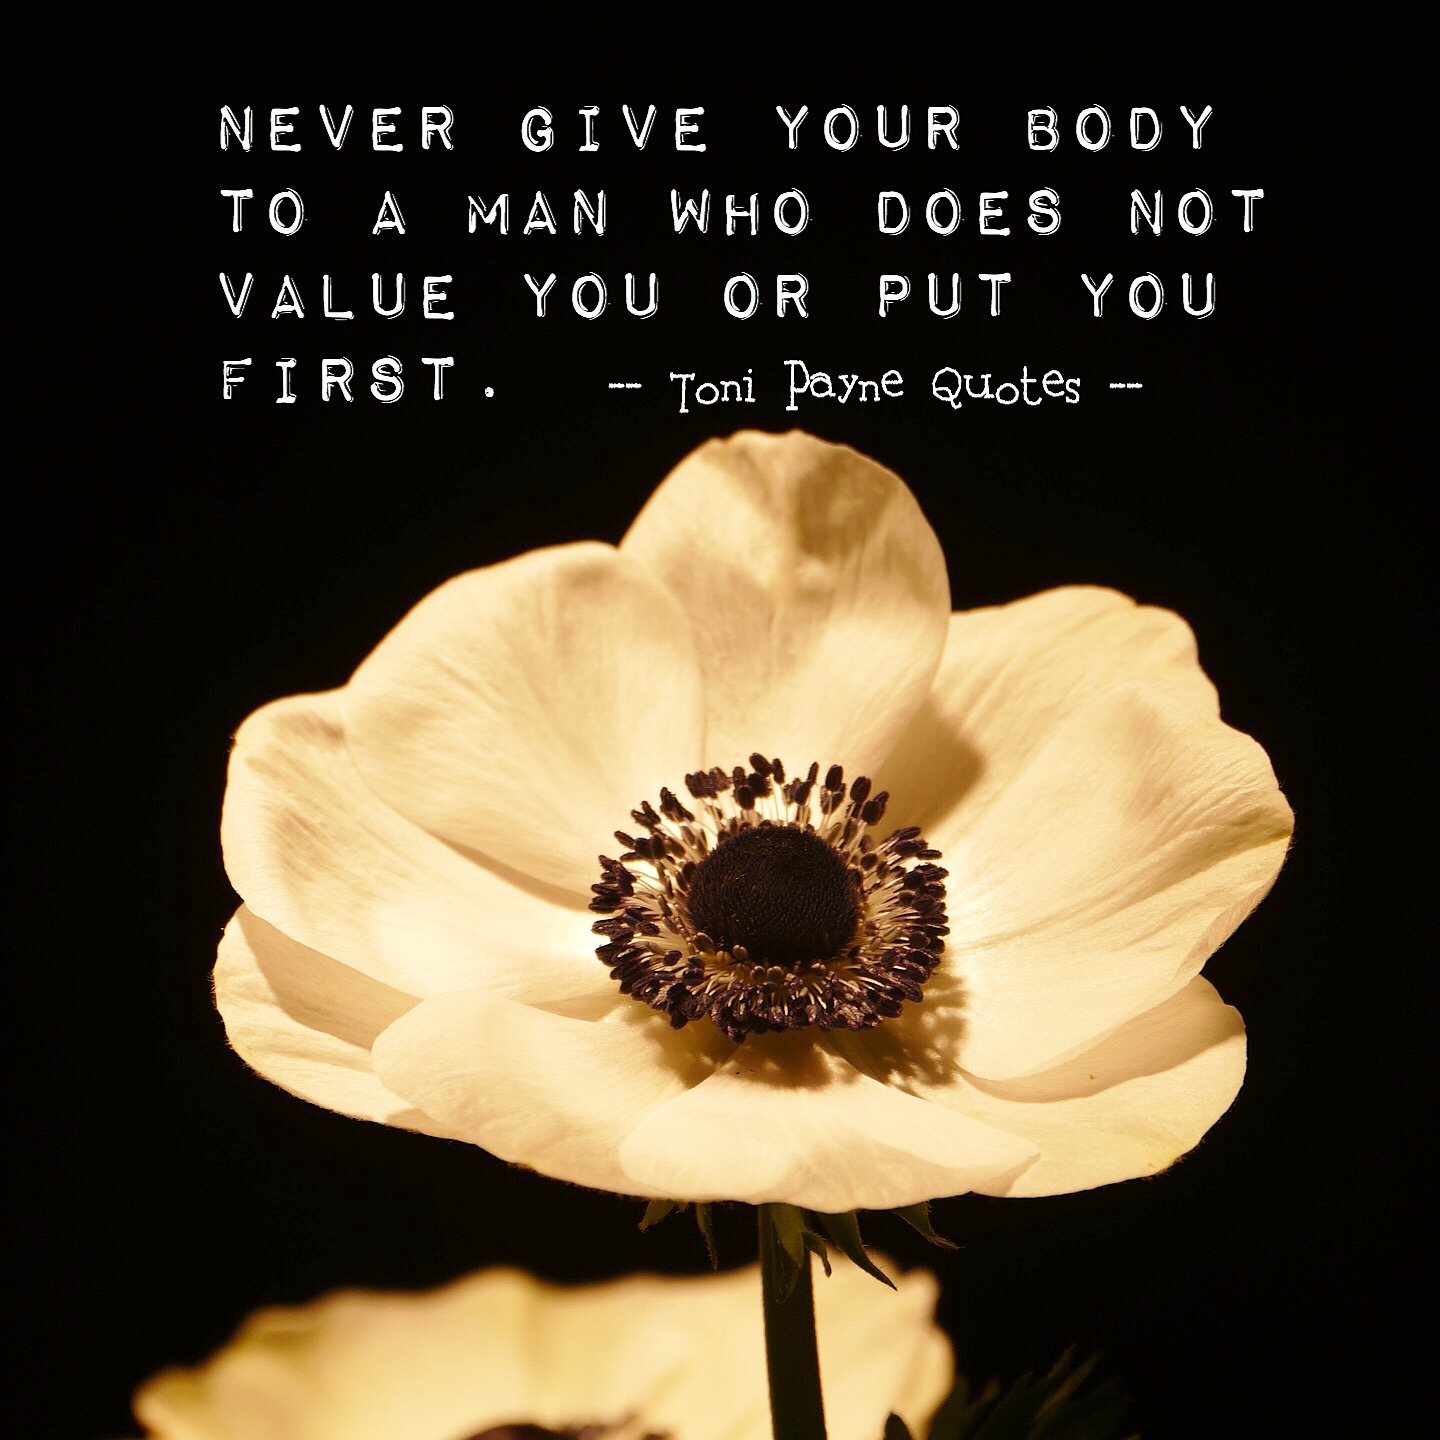 Quote about giving your body to the right person